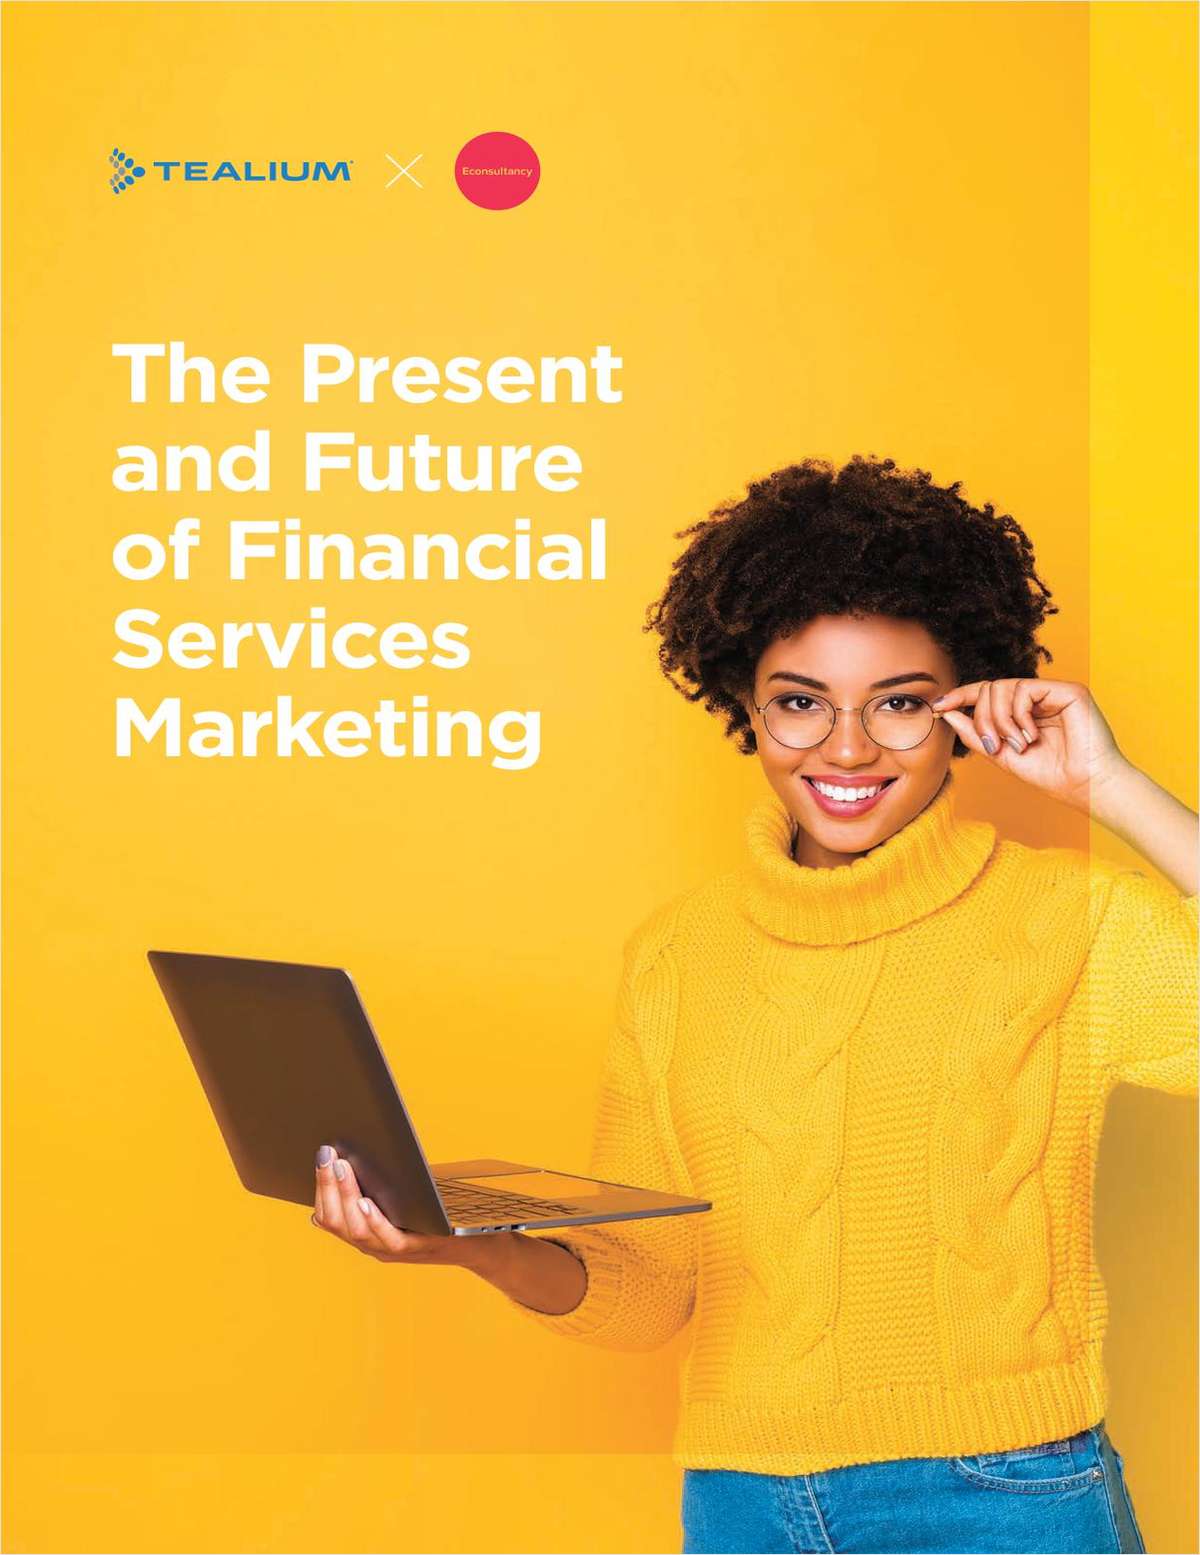 Read: The Present and Future of Financial Services Marketing